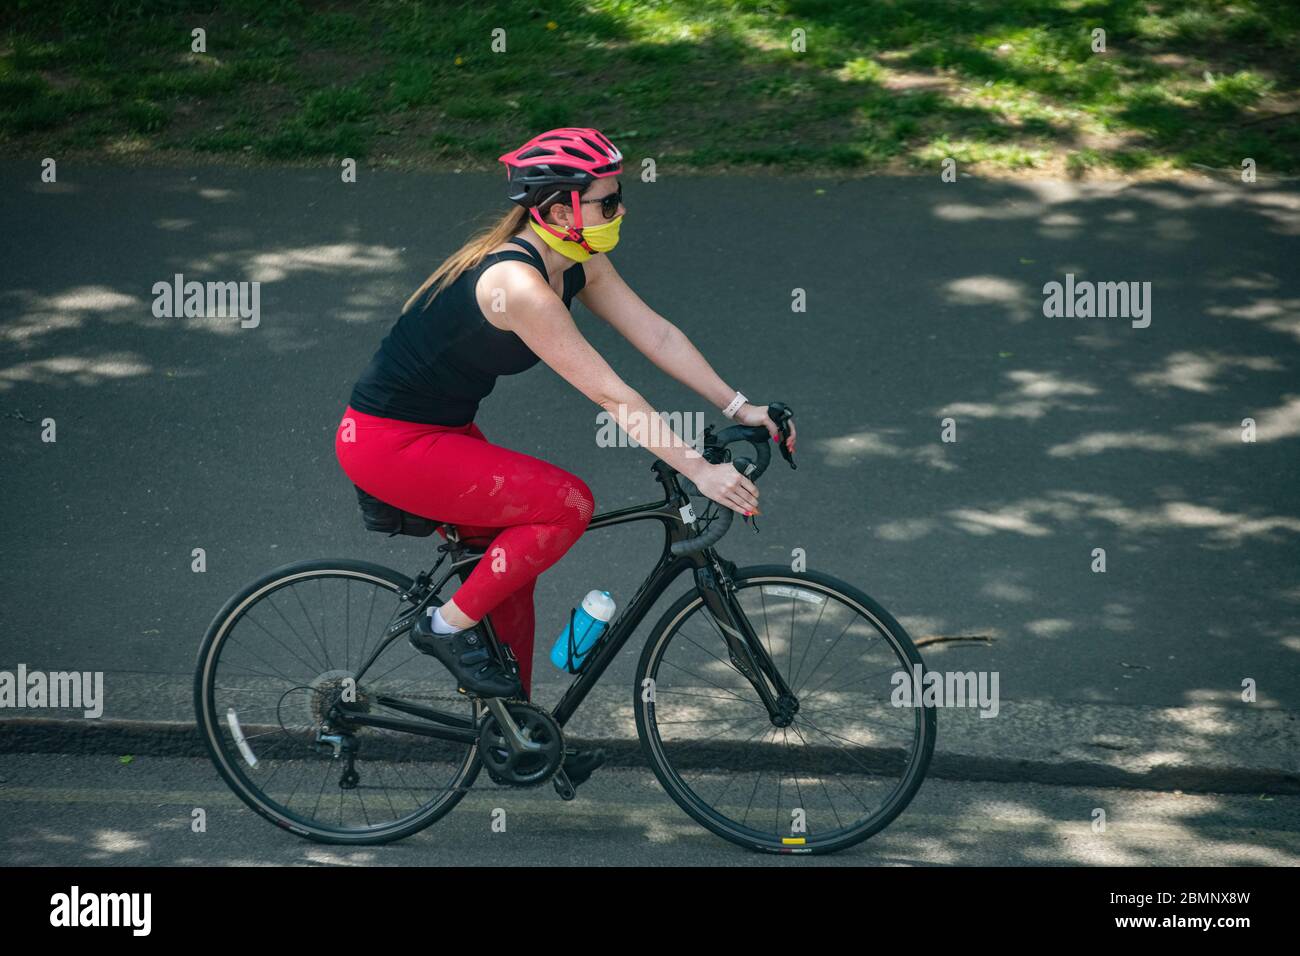 Riding a bike with a face mask during the coronavirus pandemic of 2020 Stock Photo